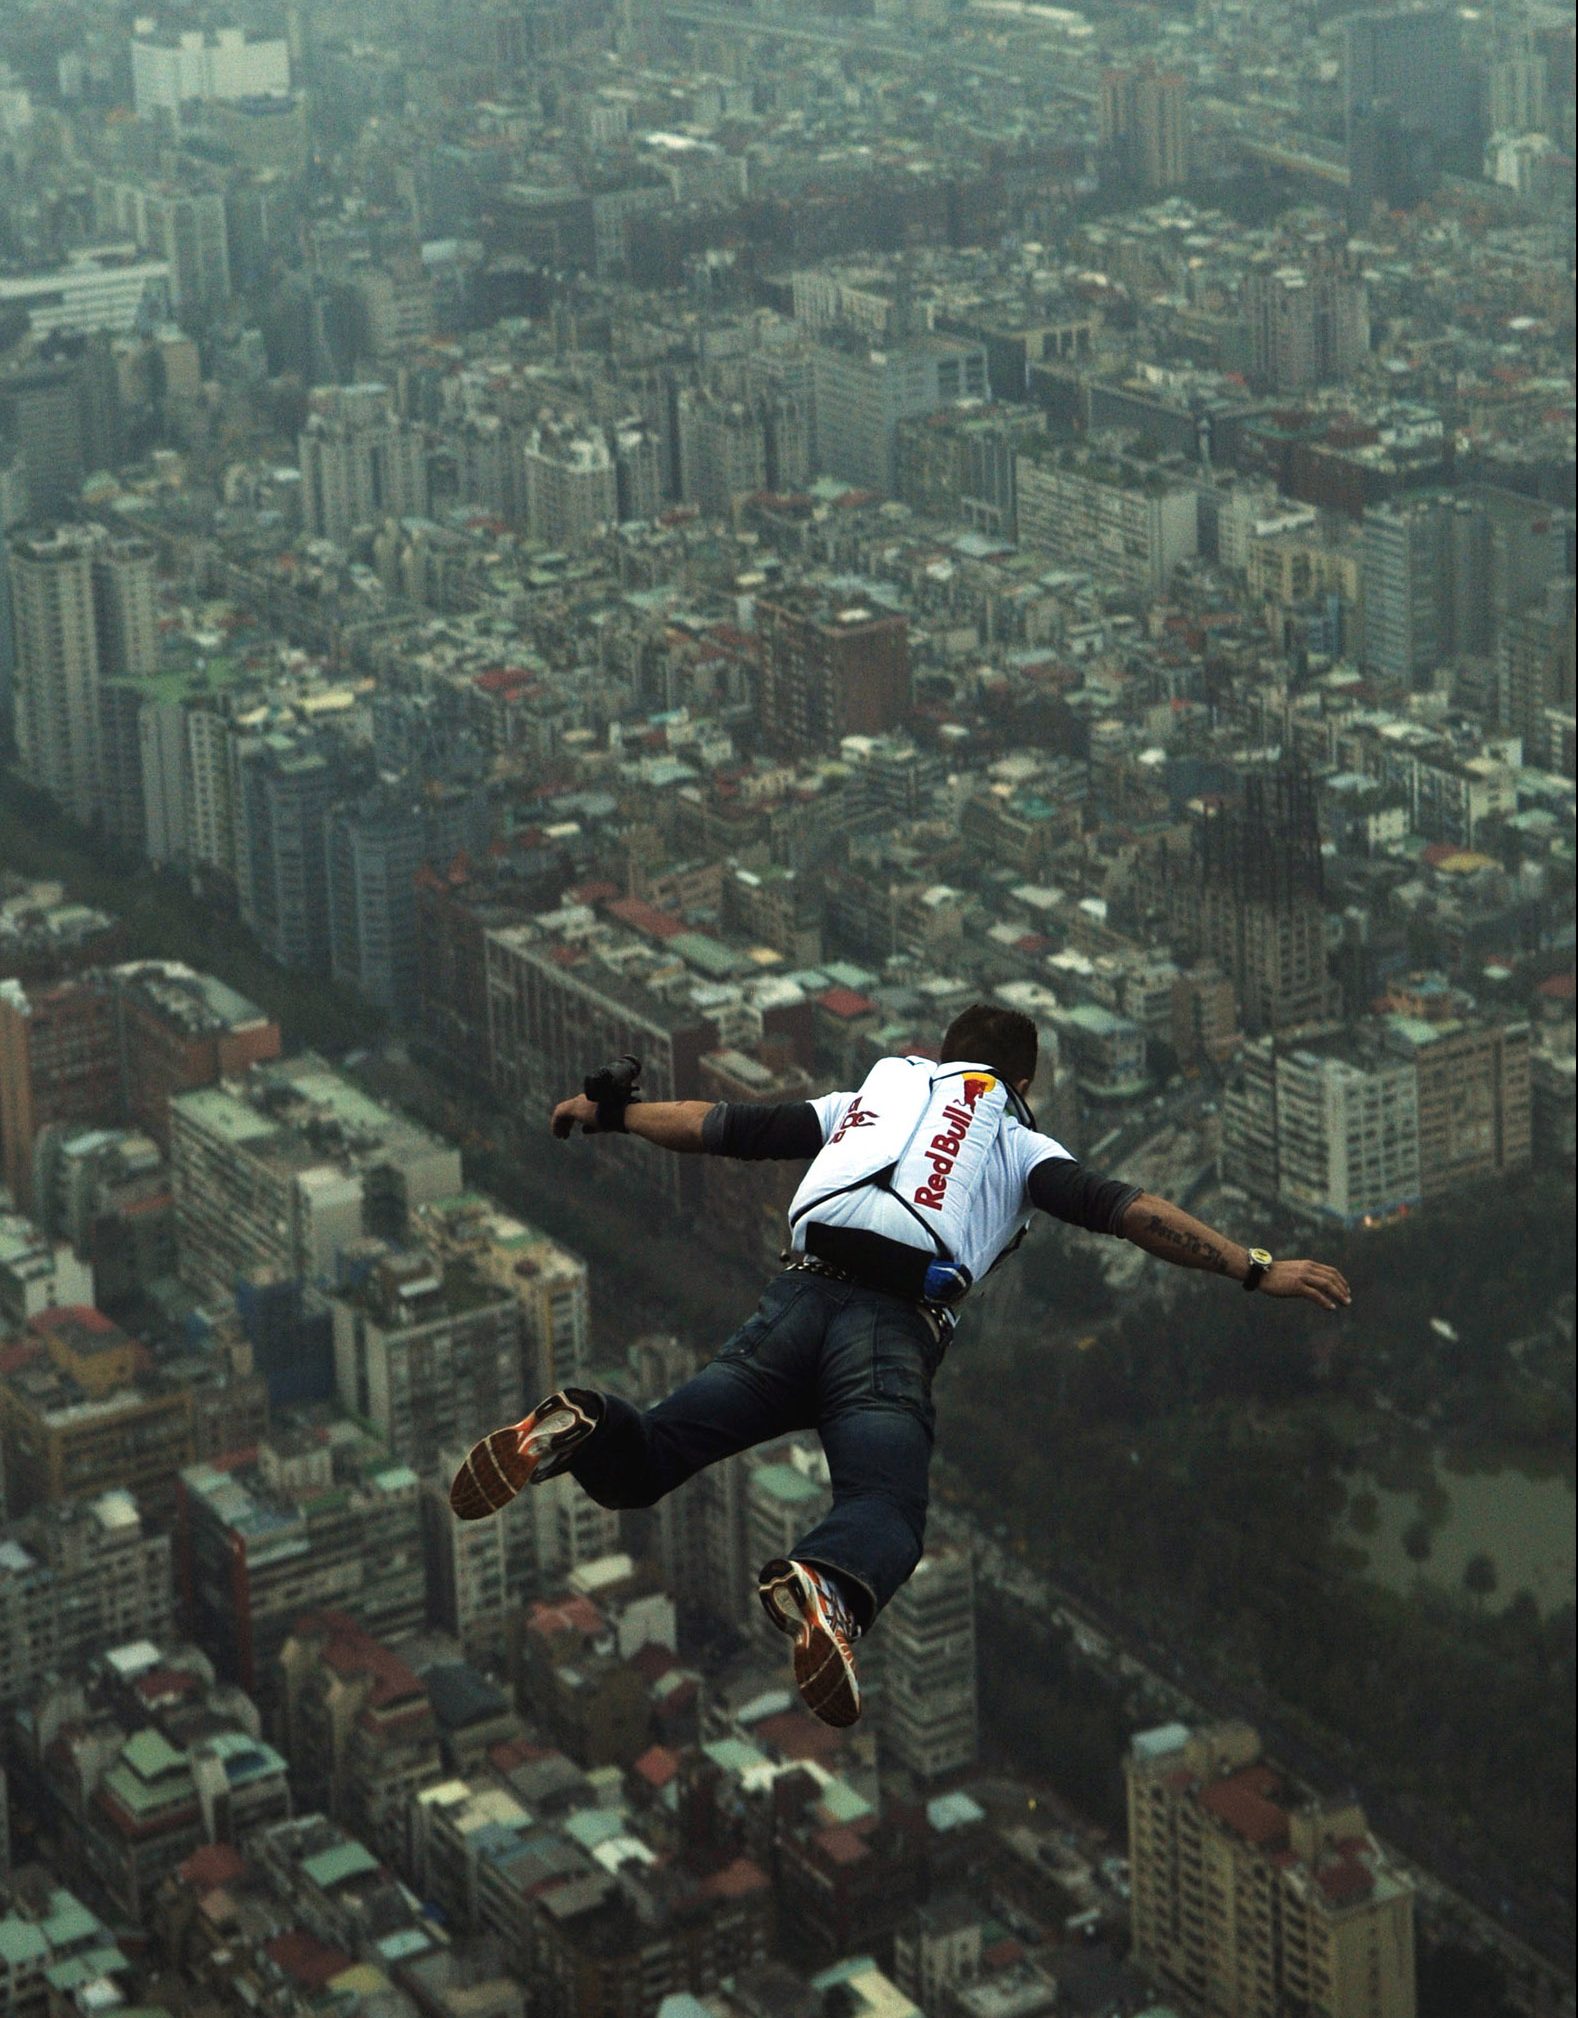 38-year-old Felix Baumgartner, Austrian base jumper, makes a jump off the world's tallest completed building, the 508-meter high Taipei 101 Tower, December 12, 2007 in Taipei, Taiwan. Image: Joerg Mitter / Euro-Newsroom via Getty Images